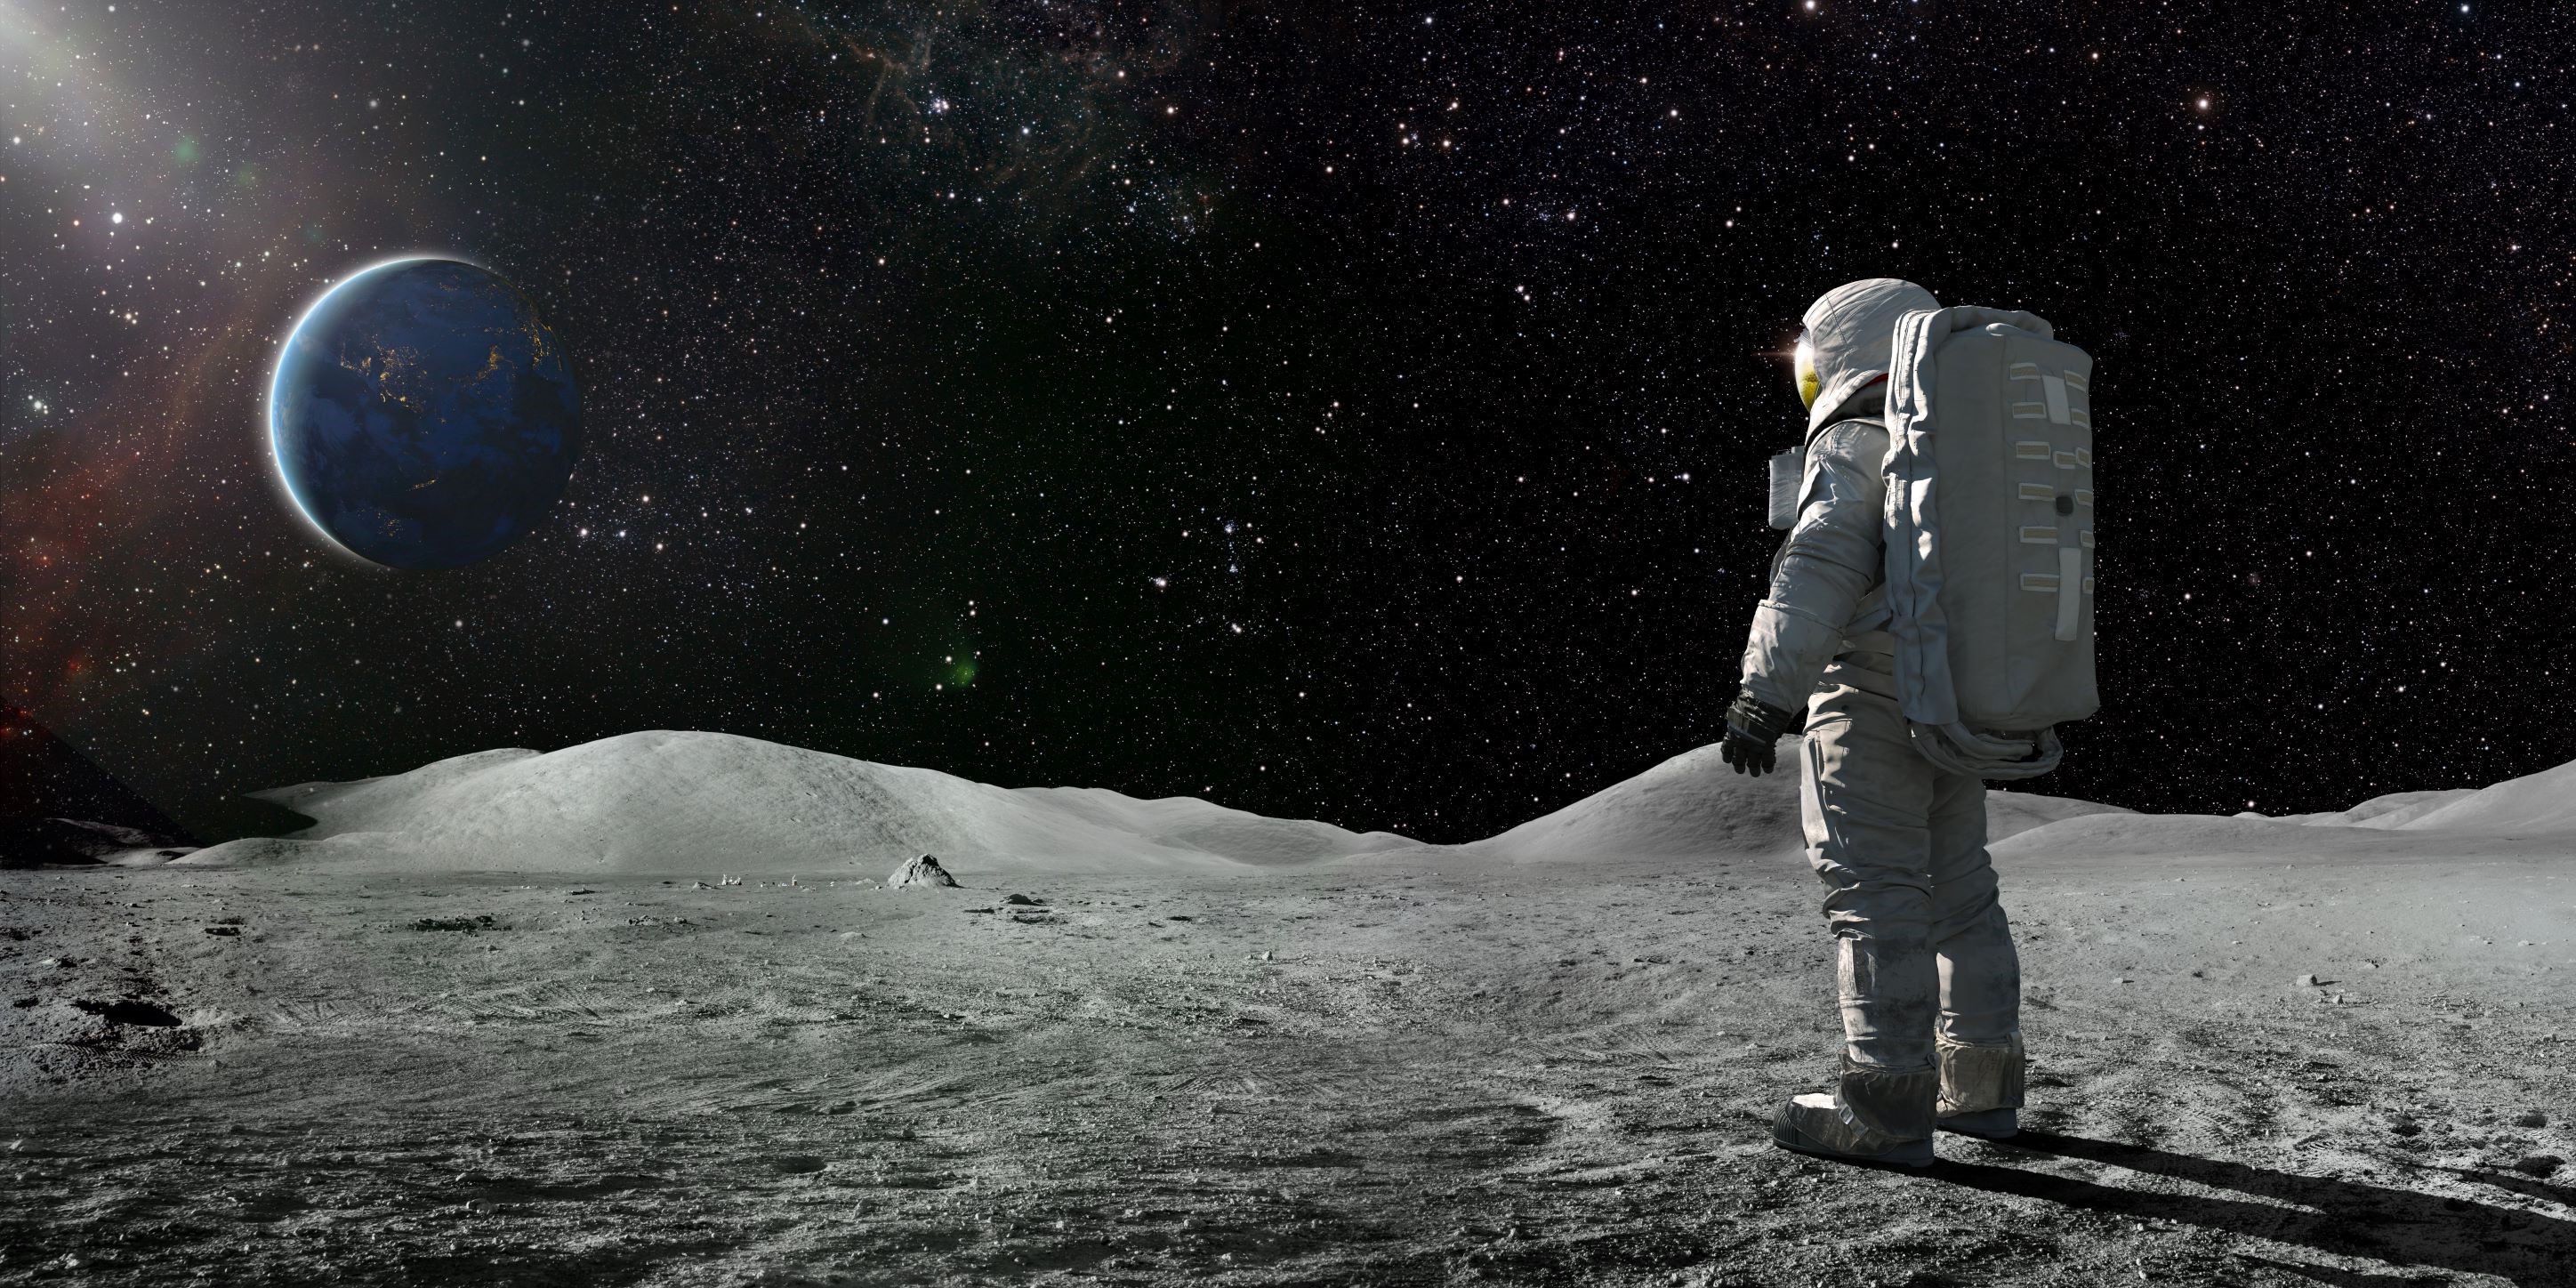 Photo of an astronaut on the Moon, looking back at Earth.